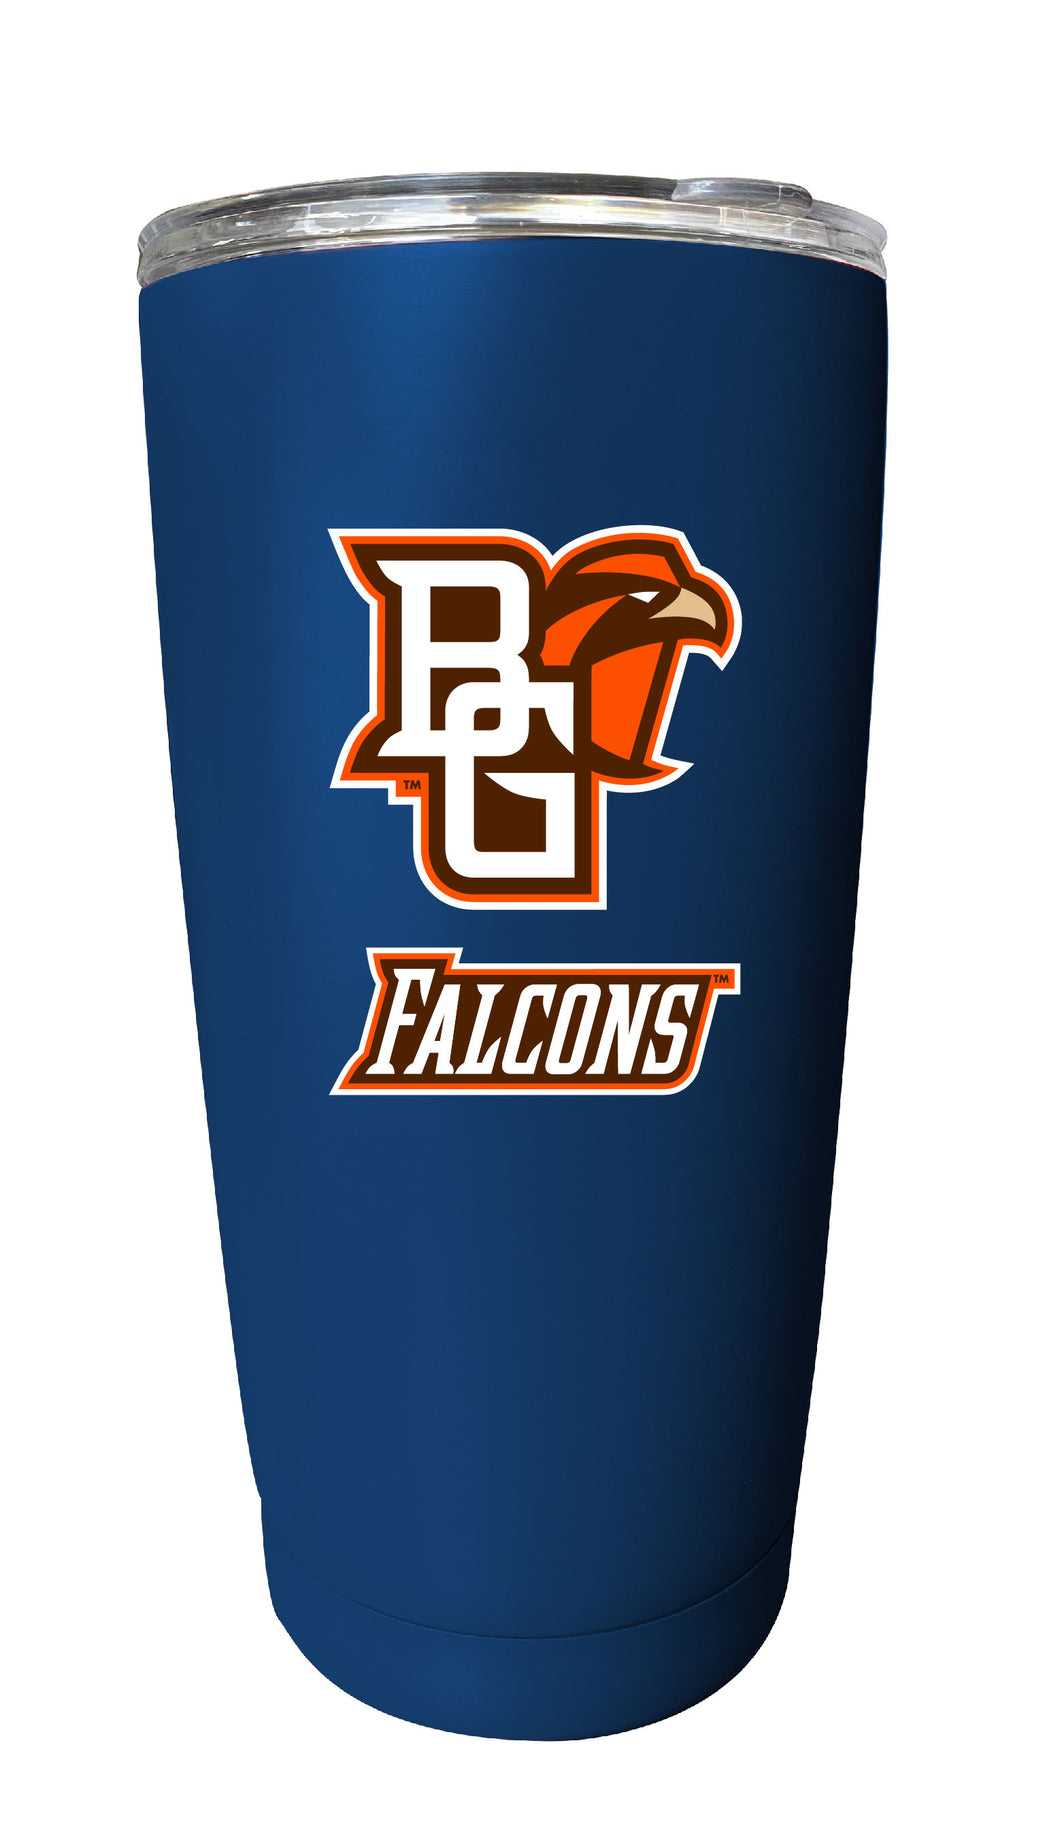 Bowling Green Falcons NCAA Insulated Tumbler - 16oz Stainless Steel Travel Mug Choose Your Color